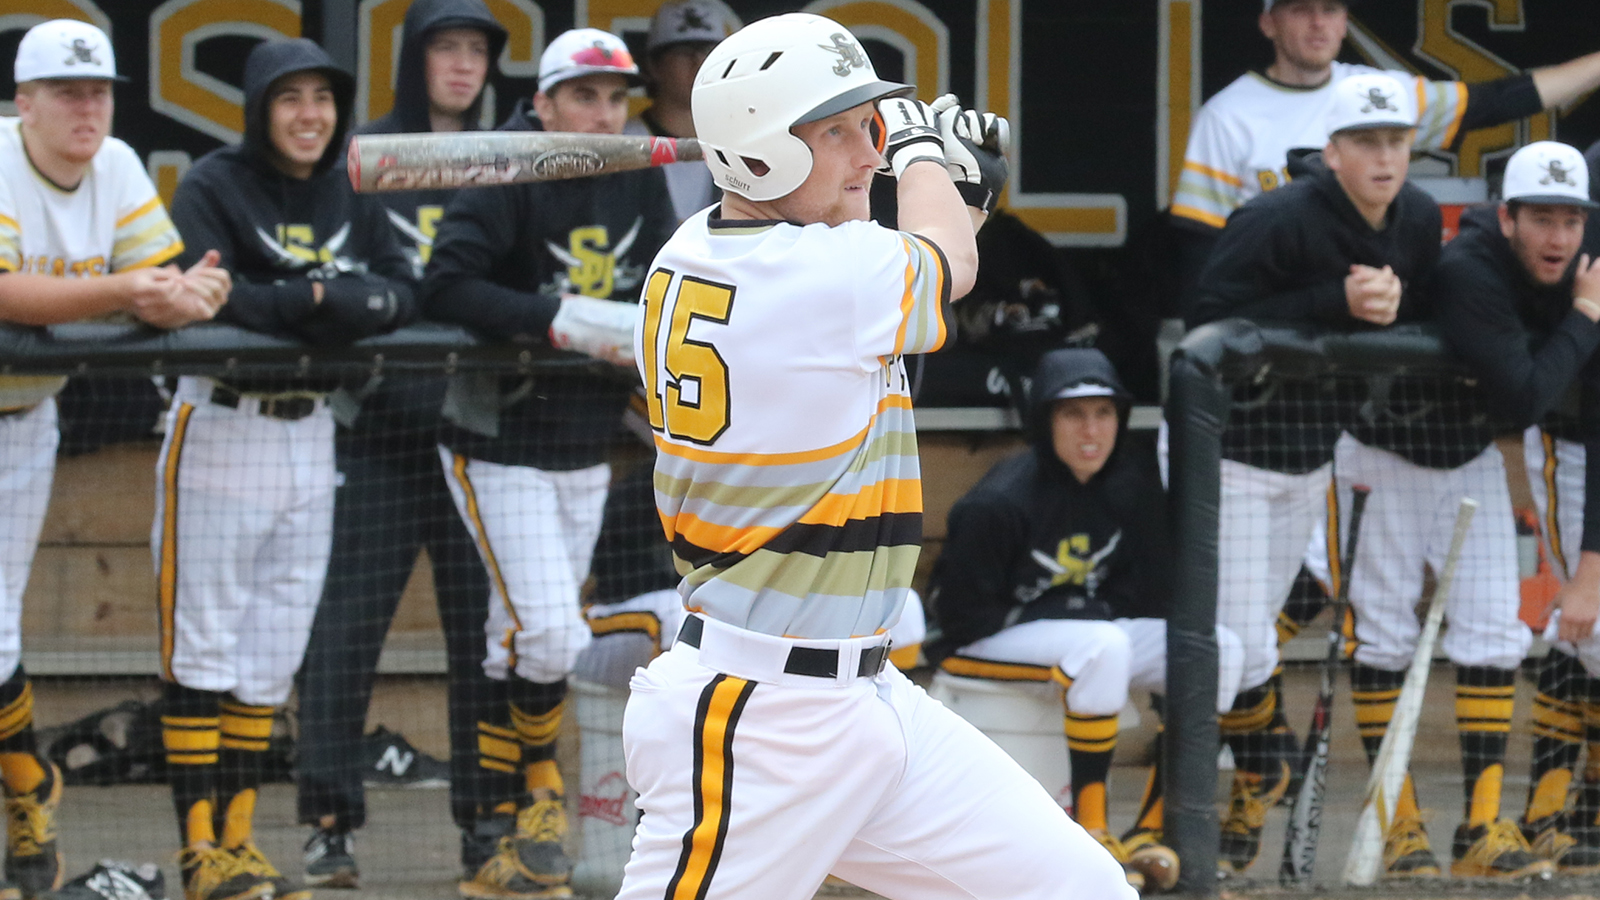 Pirates Storm Back to Knock Off Millikin and Take Series